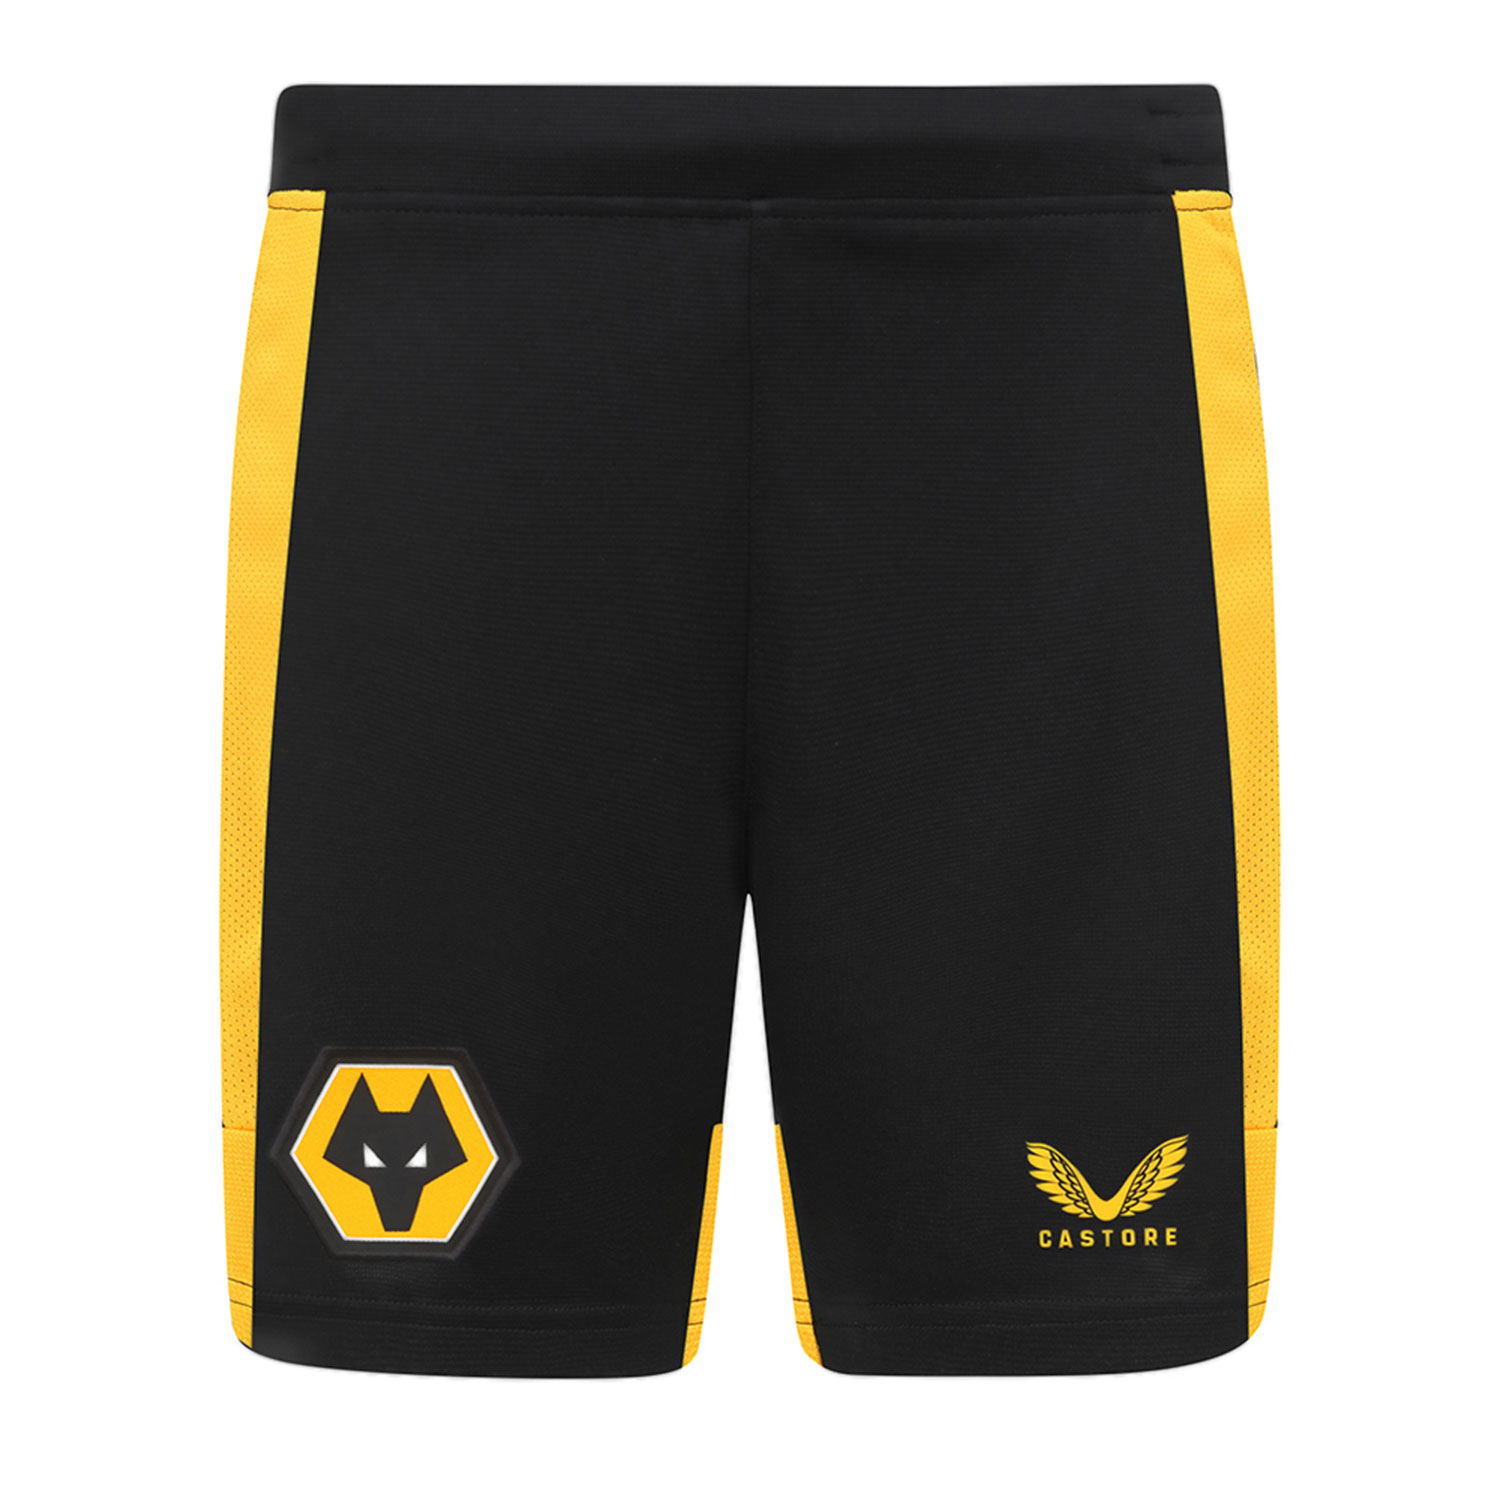 2022-23 Wolves Home Shorts - Junior
Be Part Of the Pack, with the 2022-23 Wolves Junior Home shorts and show your pride on the street and in the stands.
Featuring detailed colour matching and dyeing to be true Wolves Gold and bring it back home to the club and fans.

Contrast side and hem panel to mimic the shirt
Drawstring fastening
Featuring the Castore logo in Wolves Gold
Woven coloured Wolves crest.
100% recycled polyester
